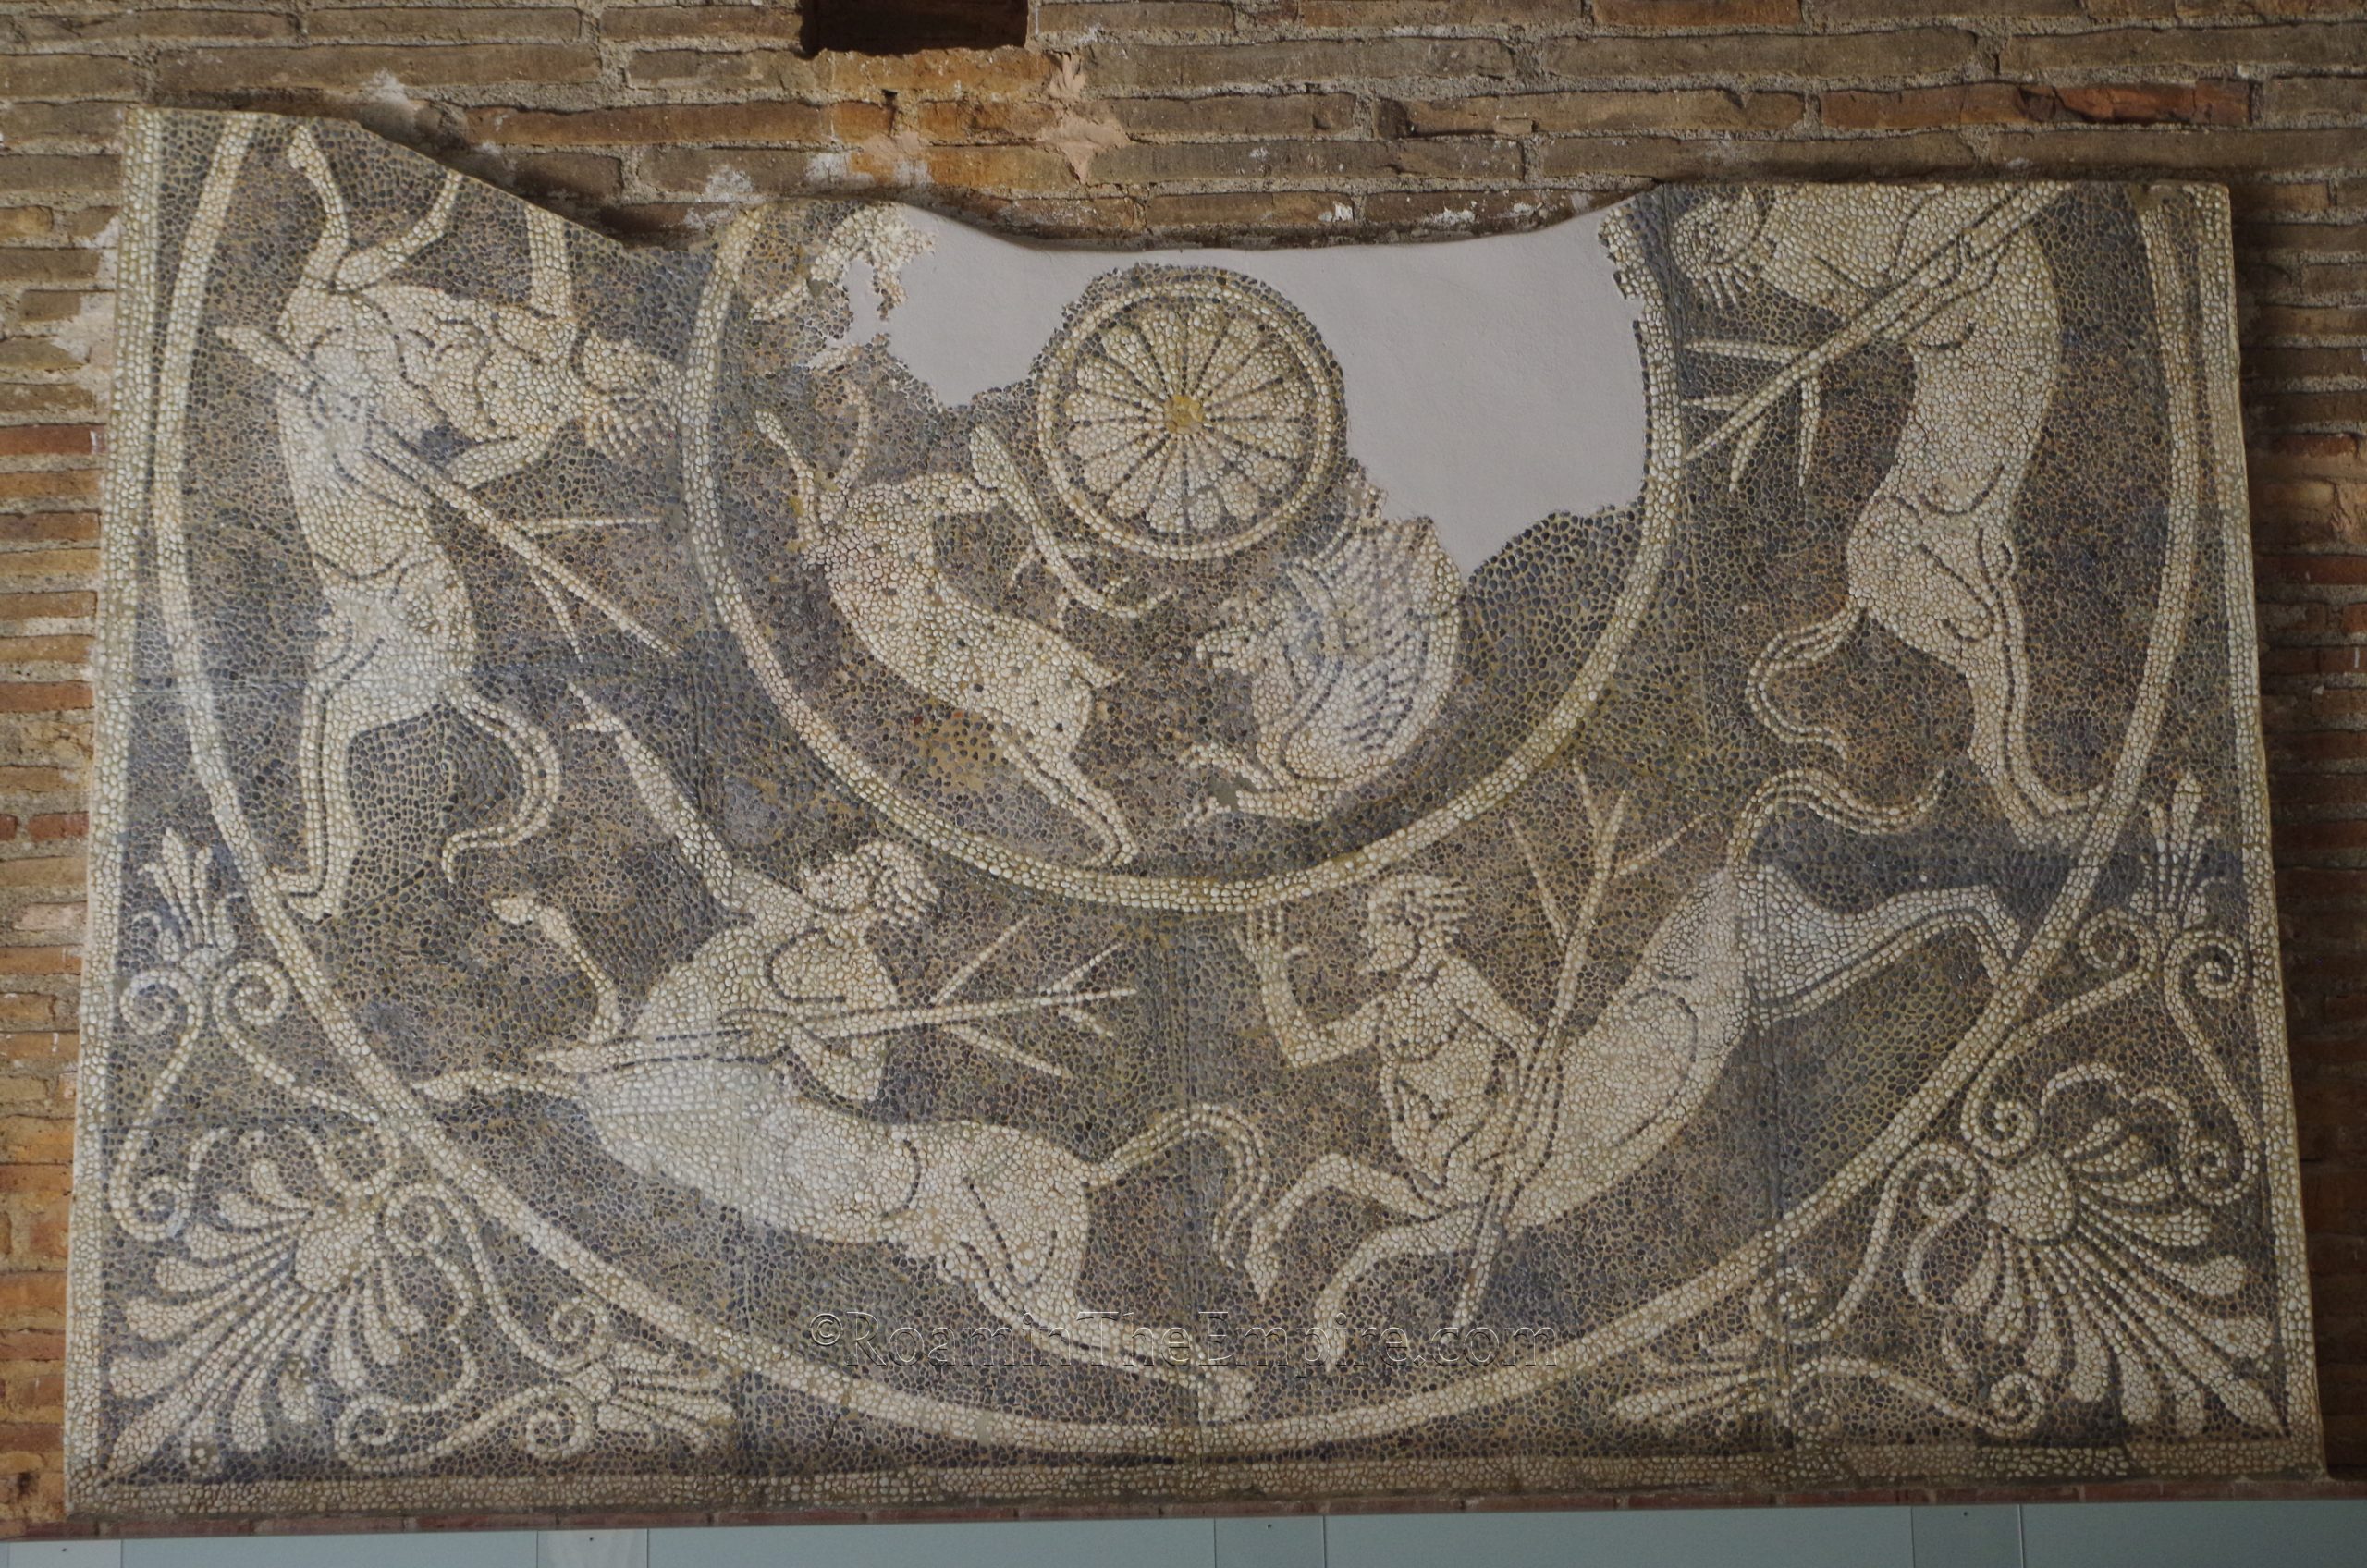 Late 4th century BCE mosaic from the are of Sicyon. In the Archaeological Museum.